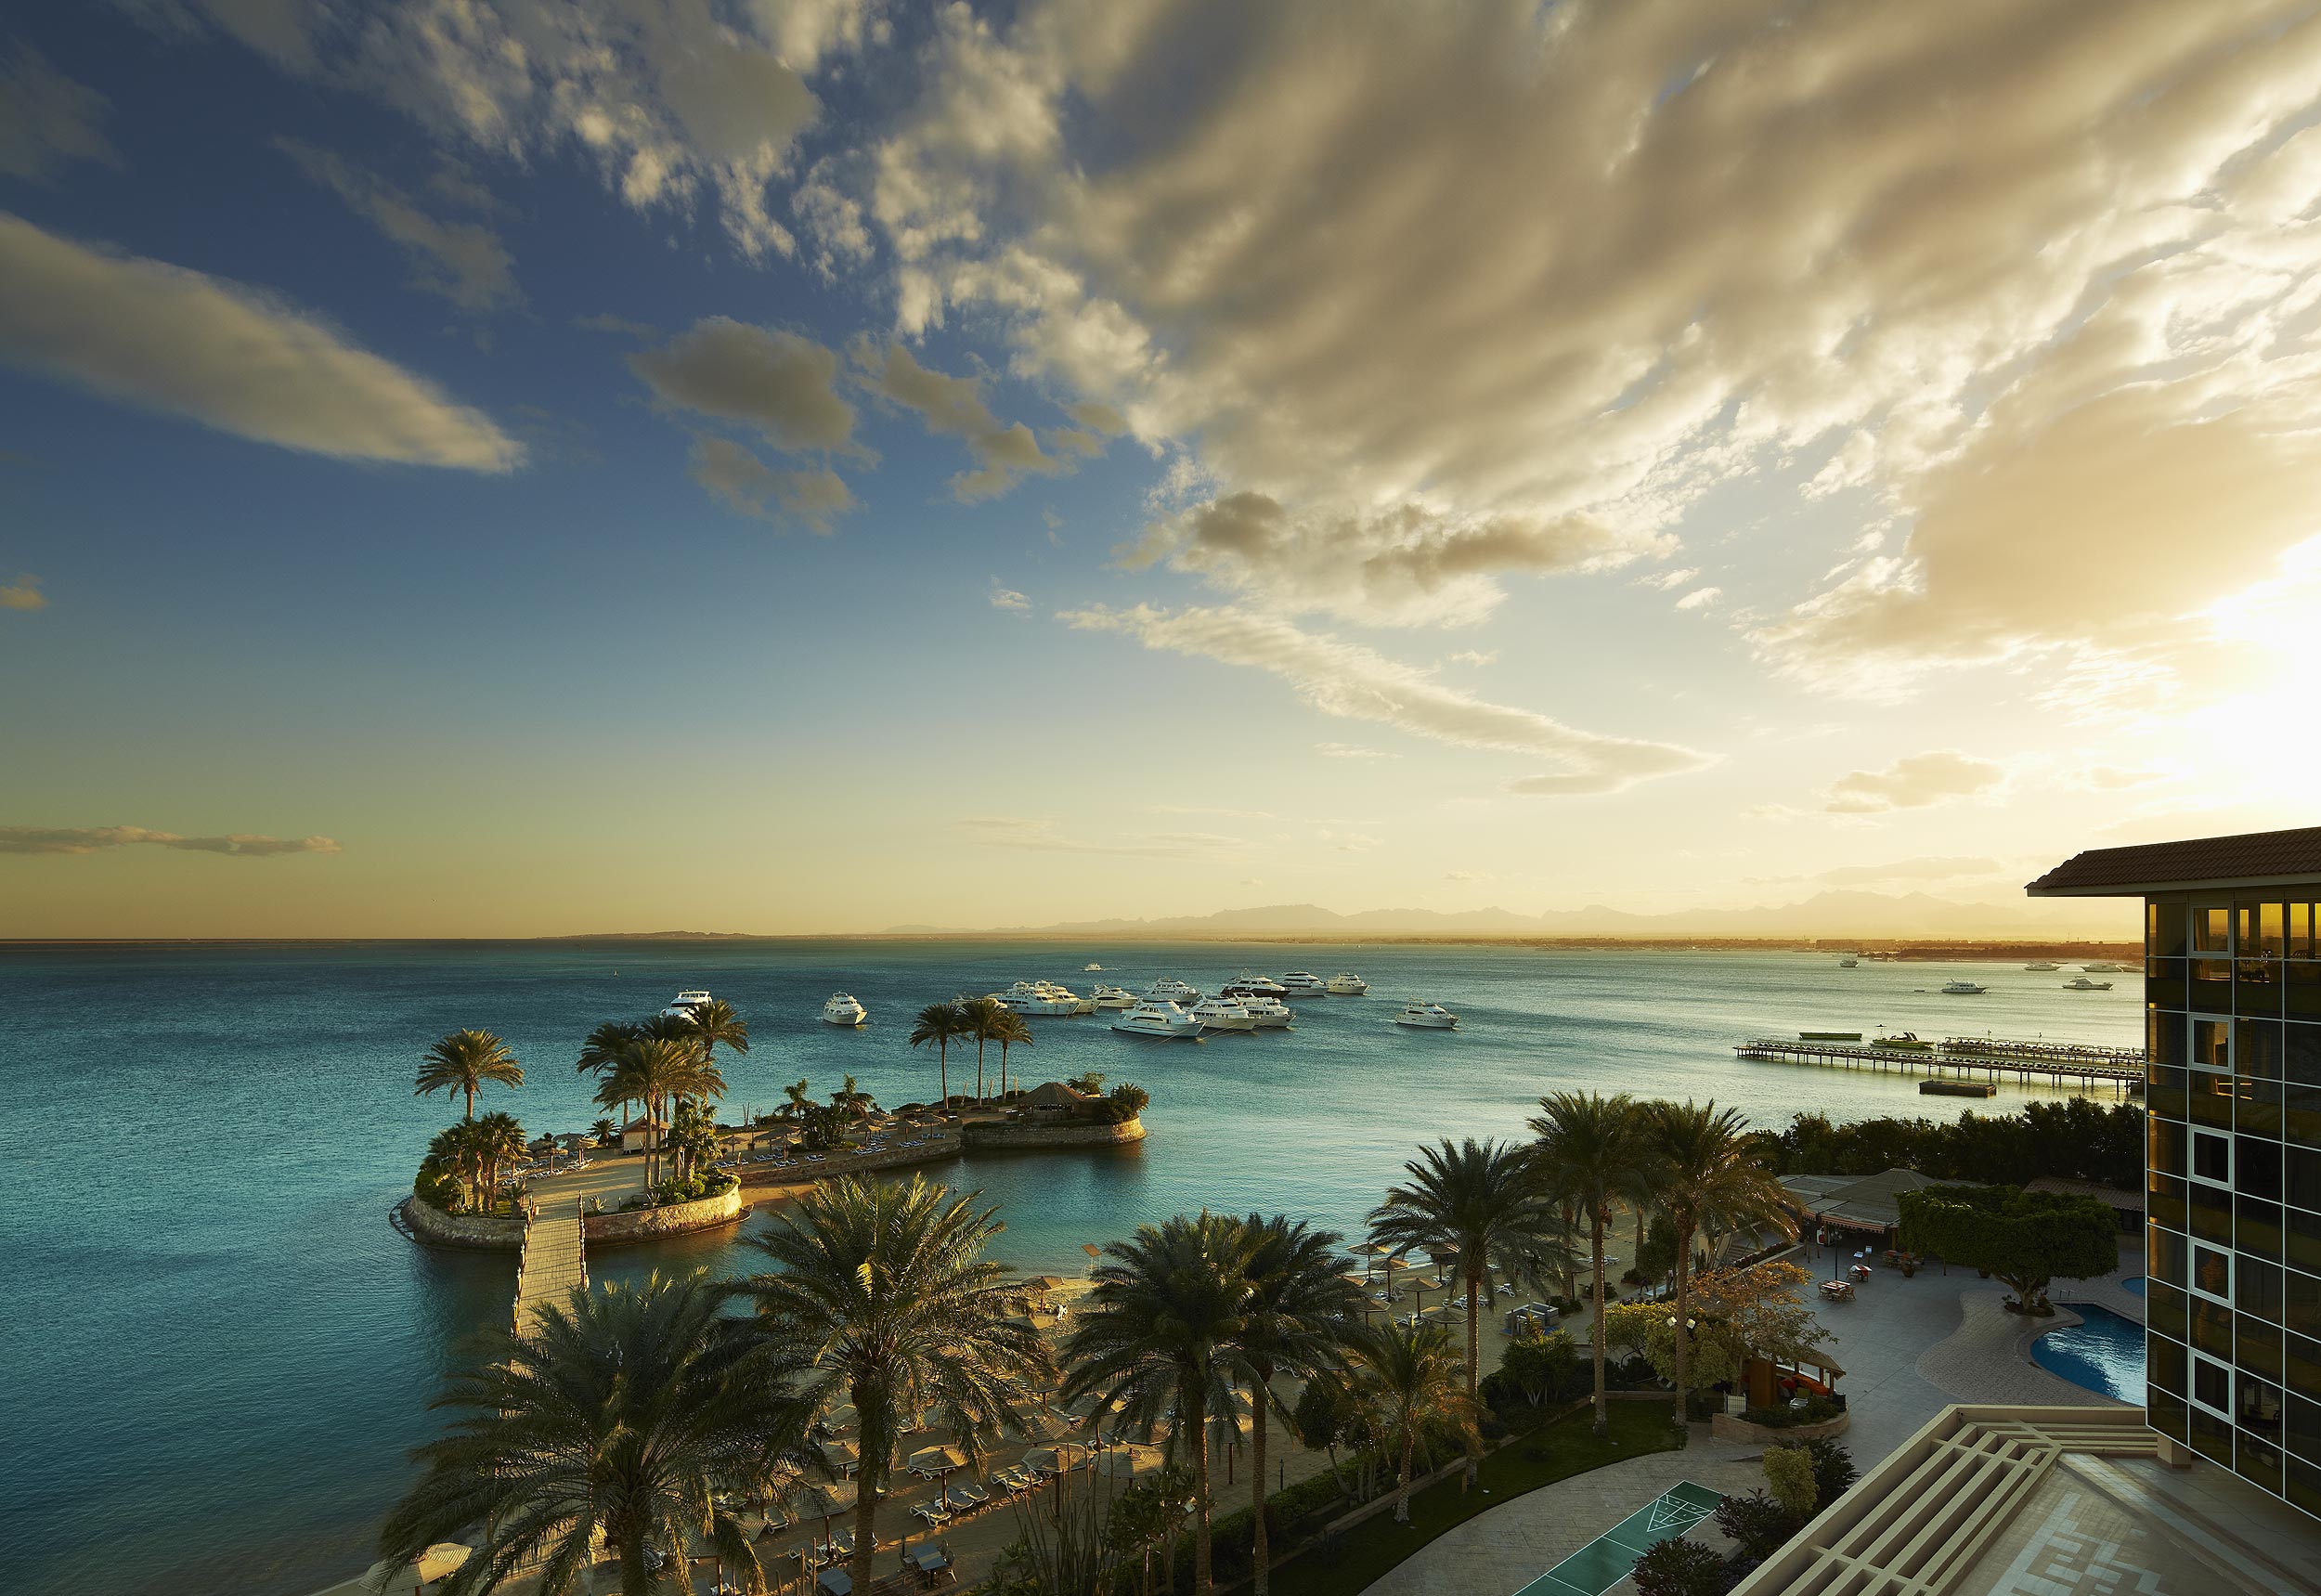 Dusk view from the Hurghada Marriott Resort hotel, Egypt.  Resort photography by Mike Caldwell